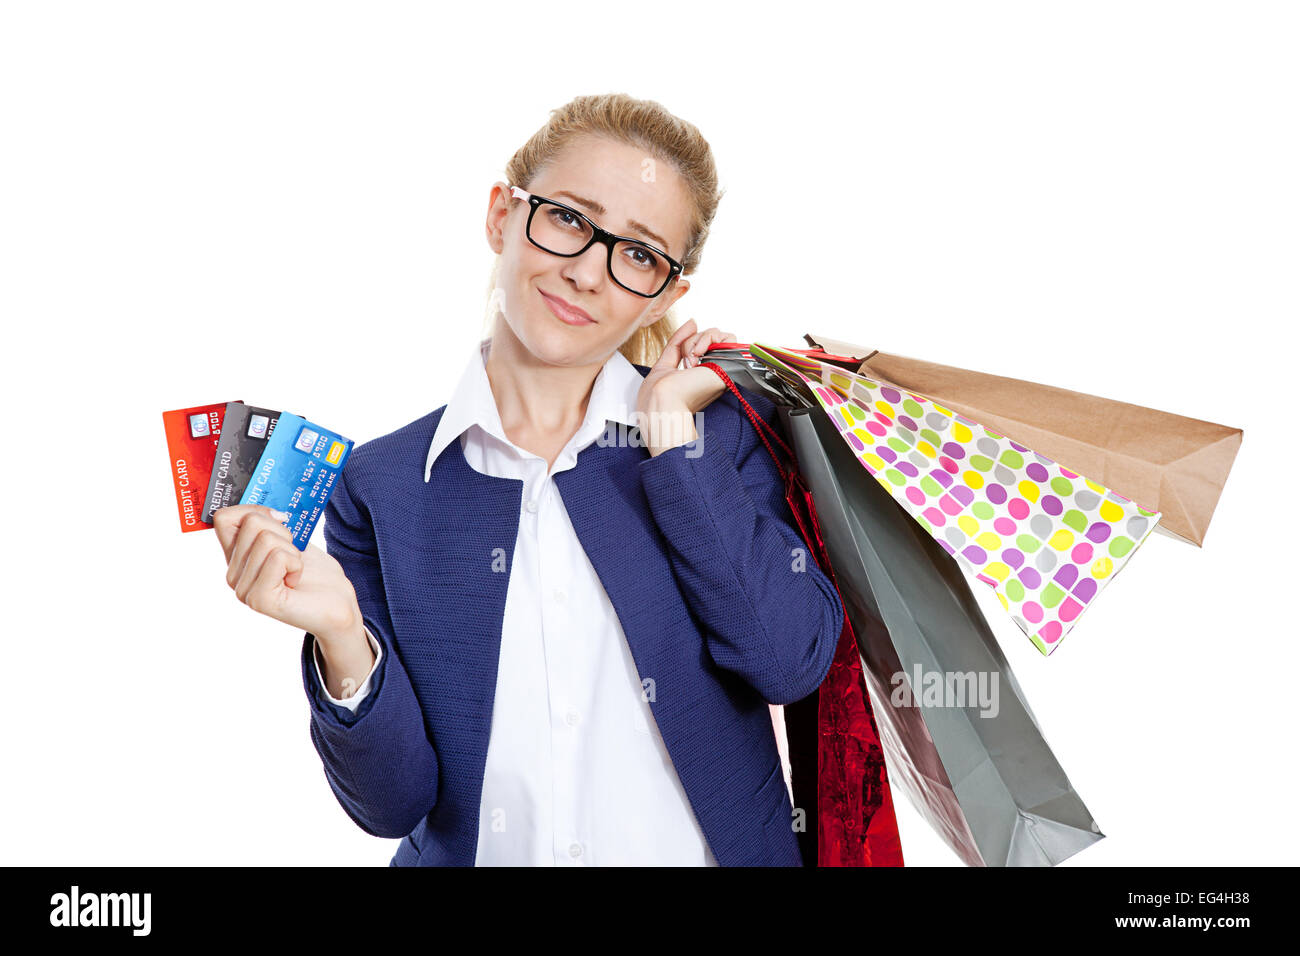 Credit Card Debt Attractive Young Woman With Money Worrie Stock Photo